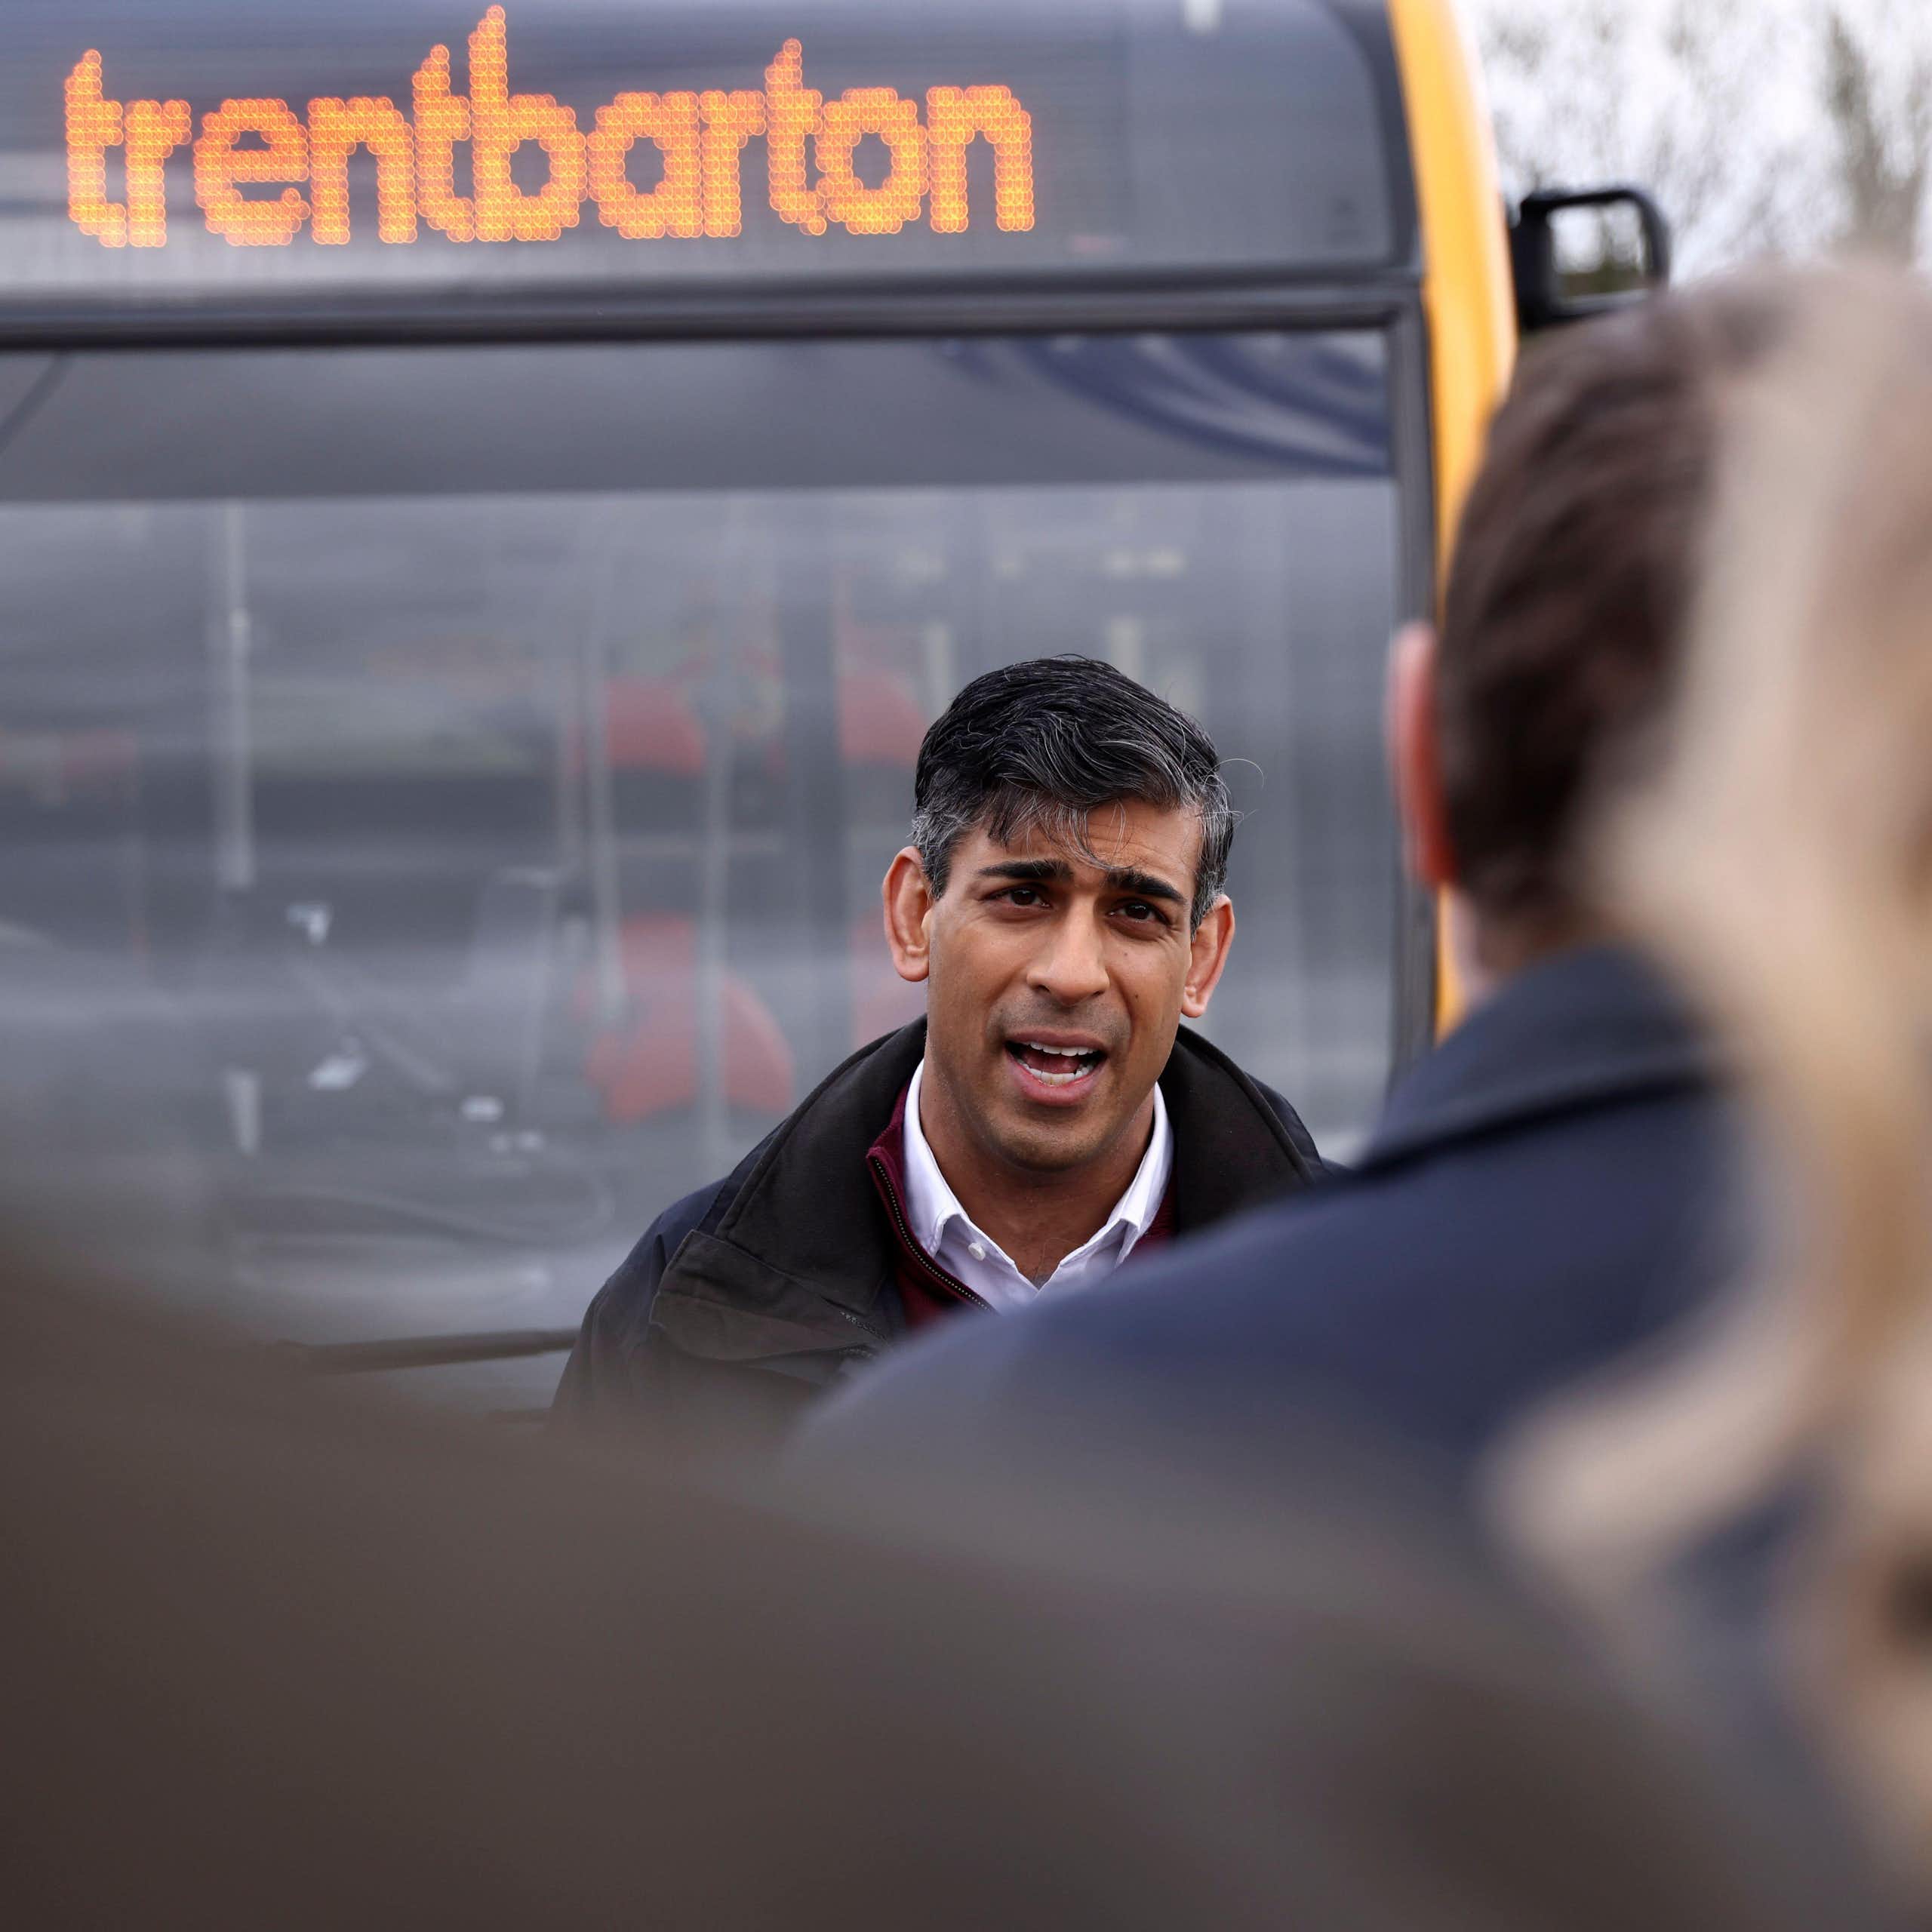 Rishi Sunak talking to a crowd of people standing in front of a bus with the destination sign reading 'trentbarton'